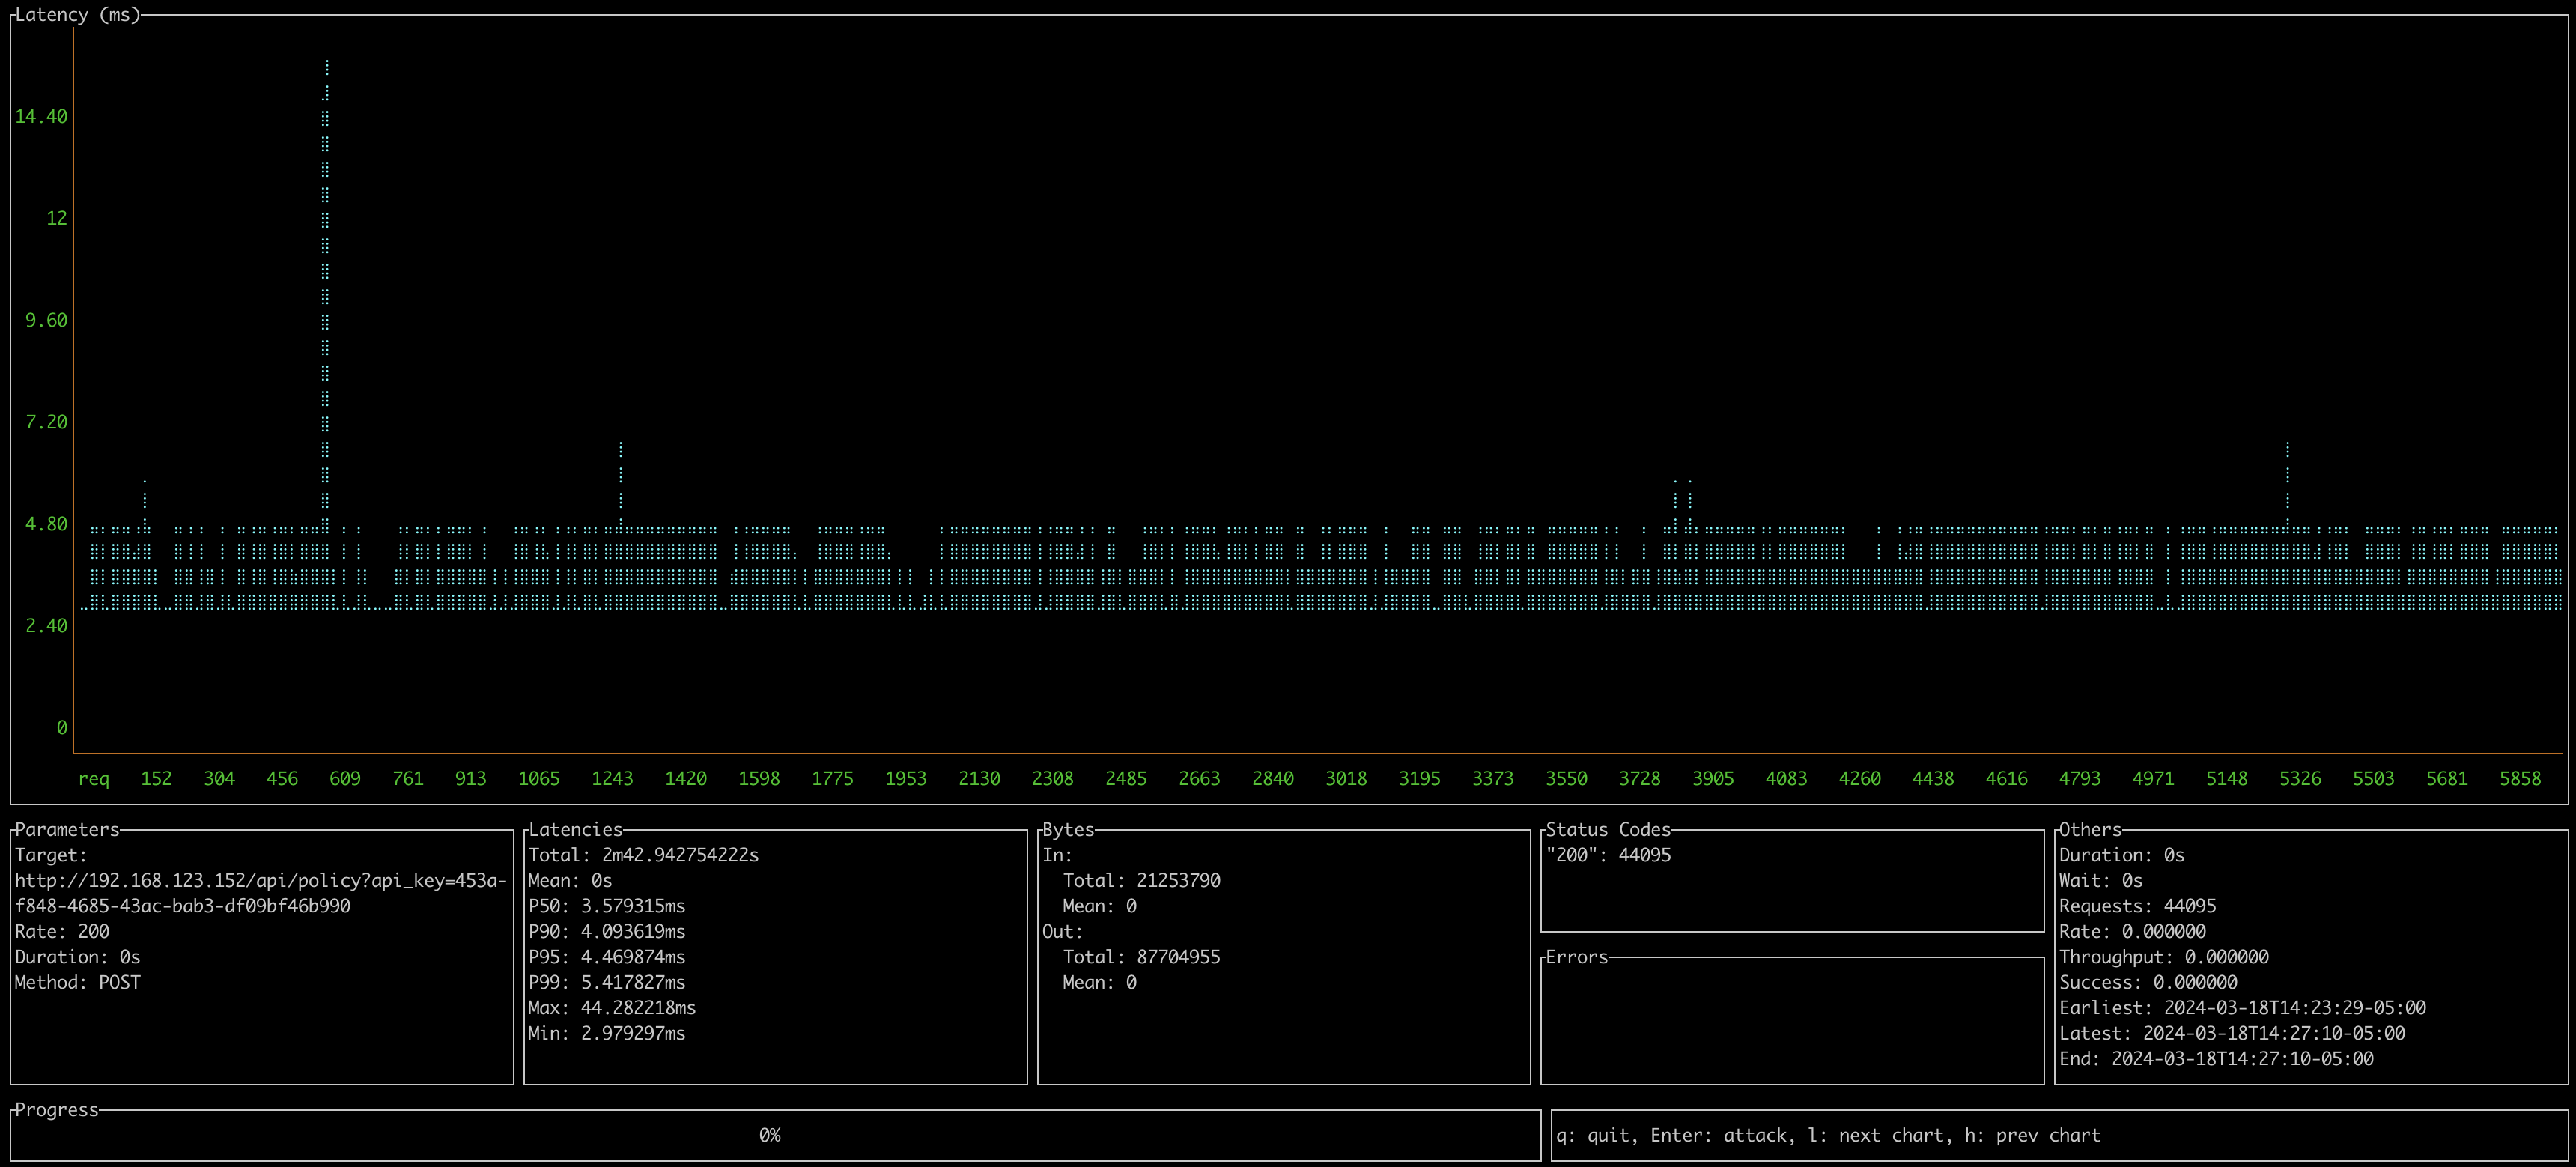 A screenshot showing latency results from testing